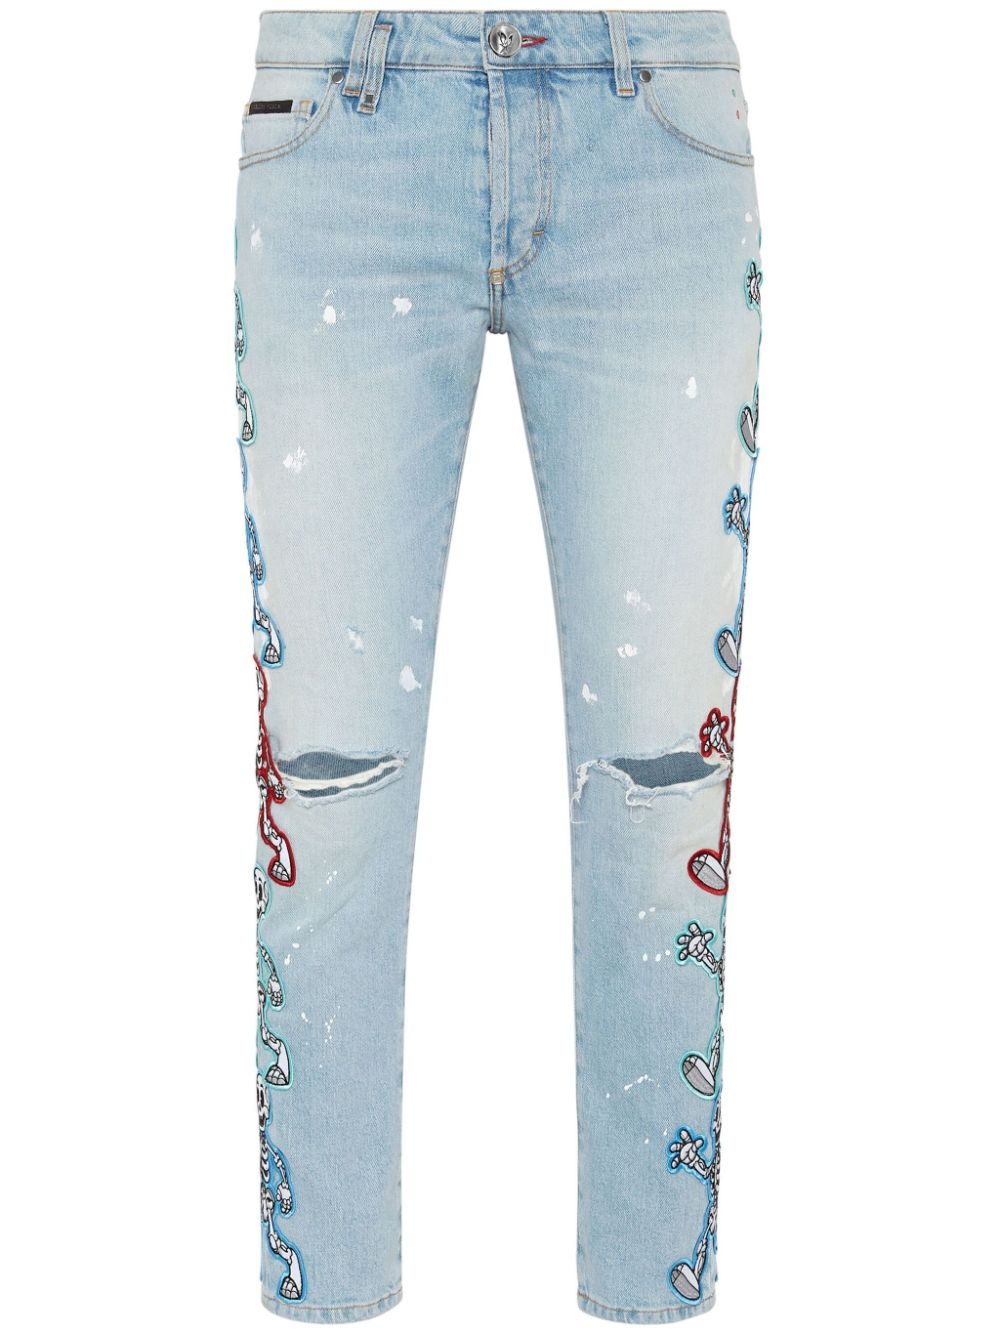 Skully Gang low-rise skinny jeans - 1